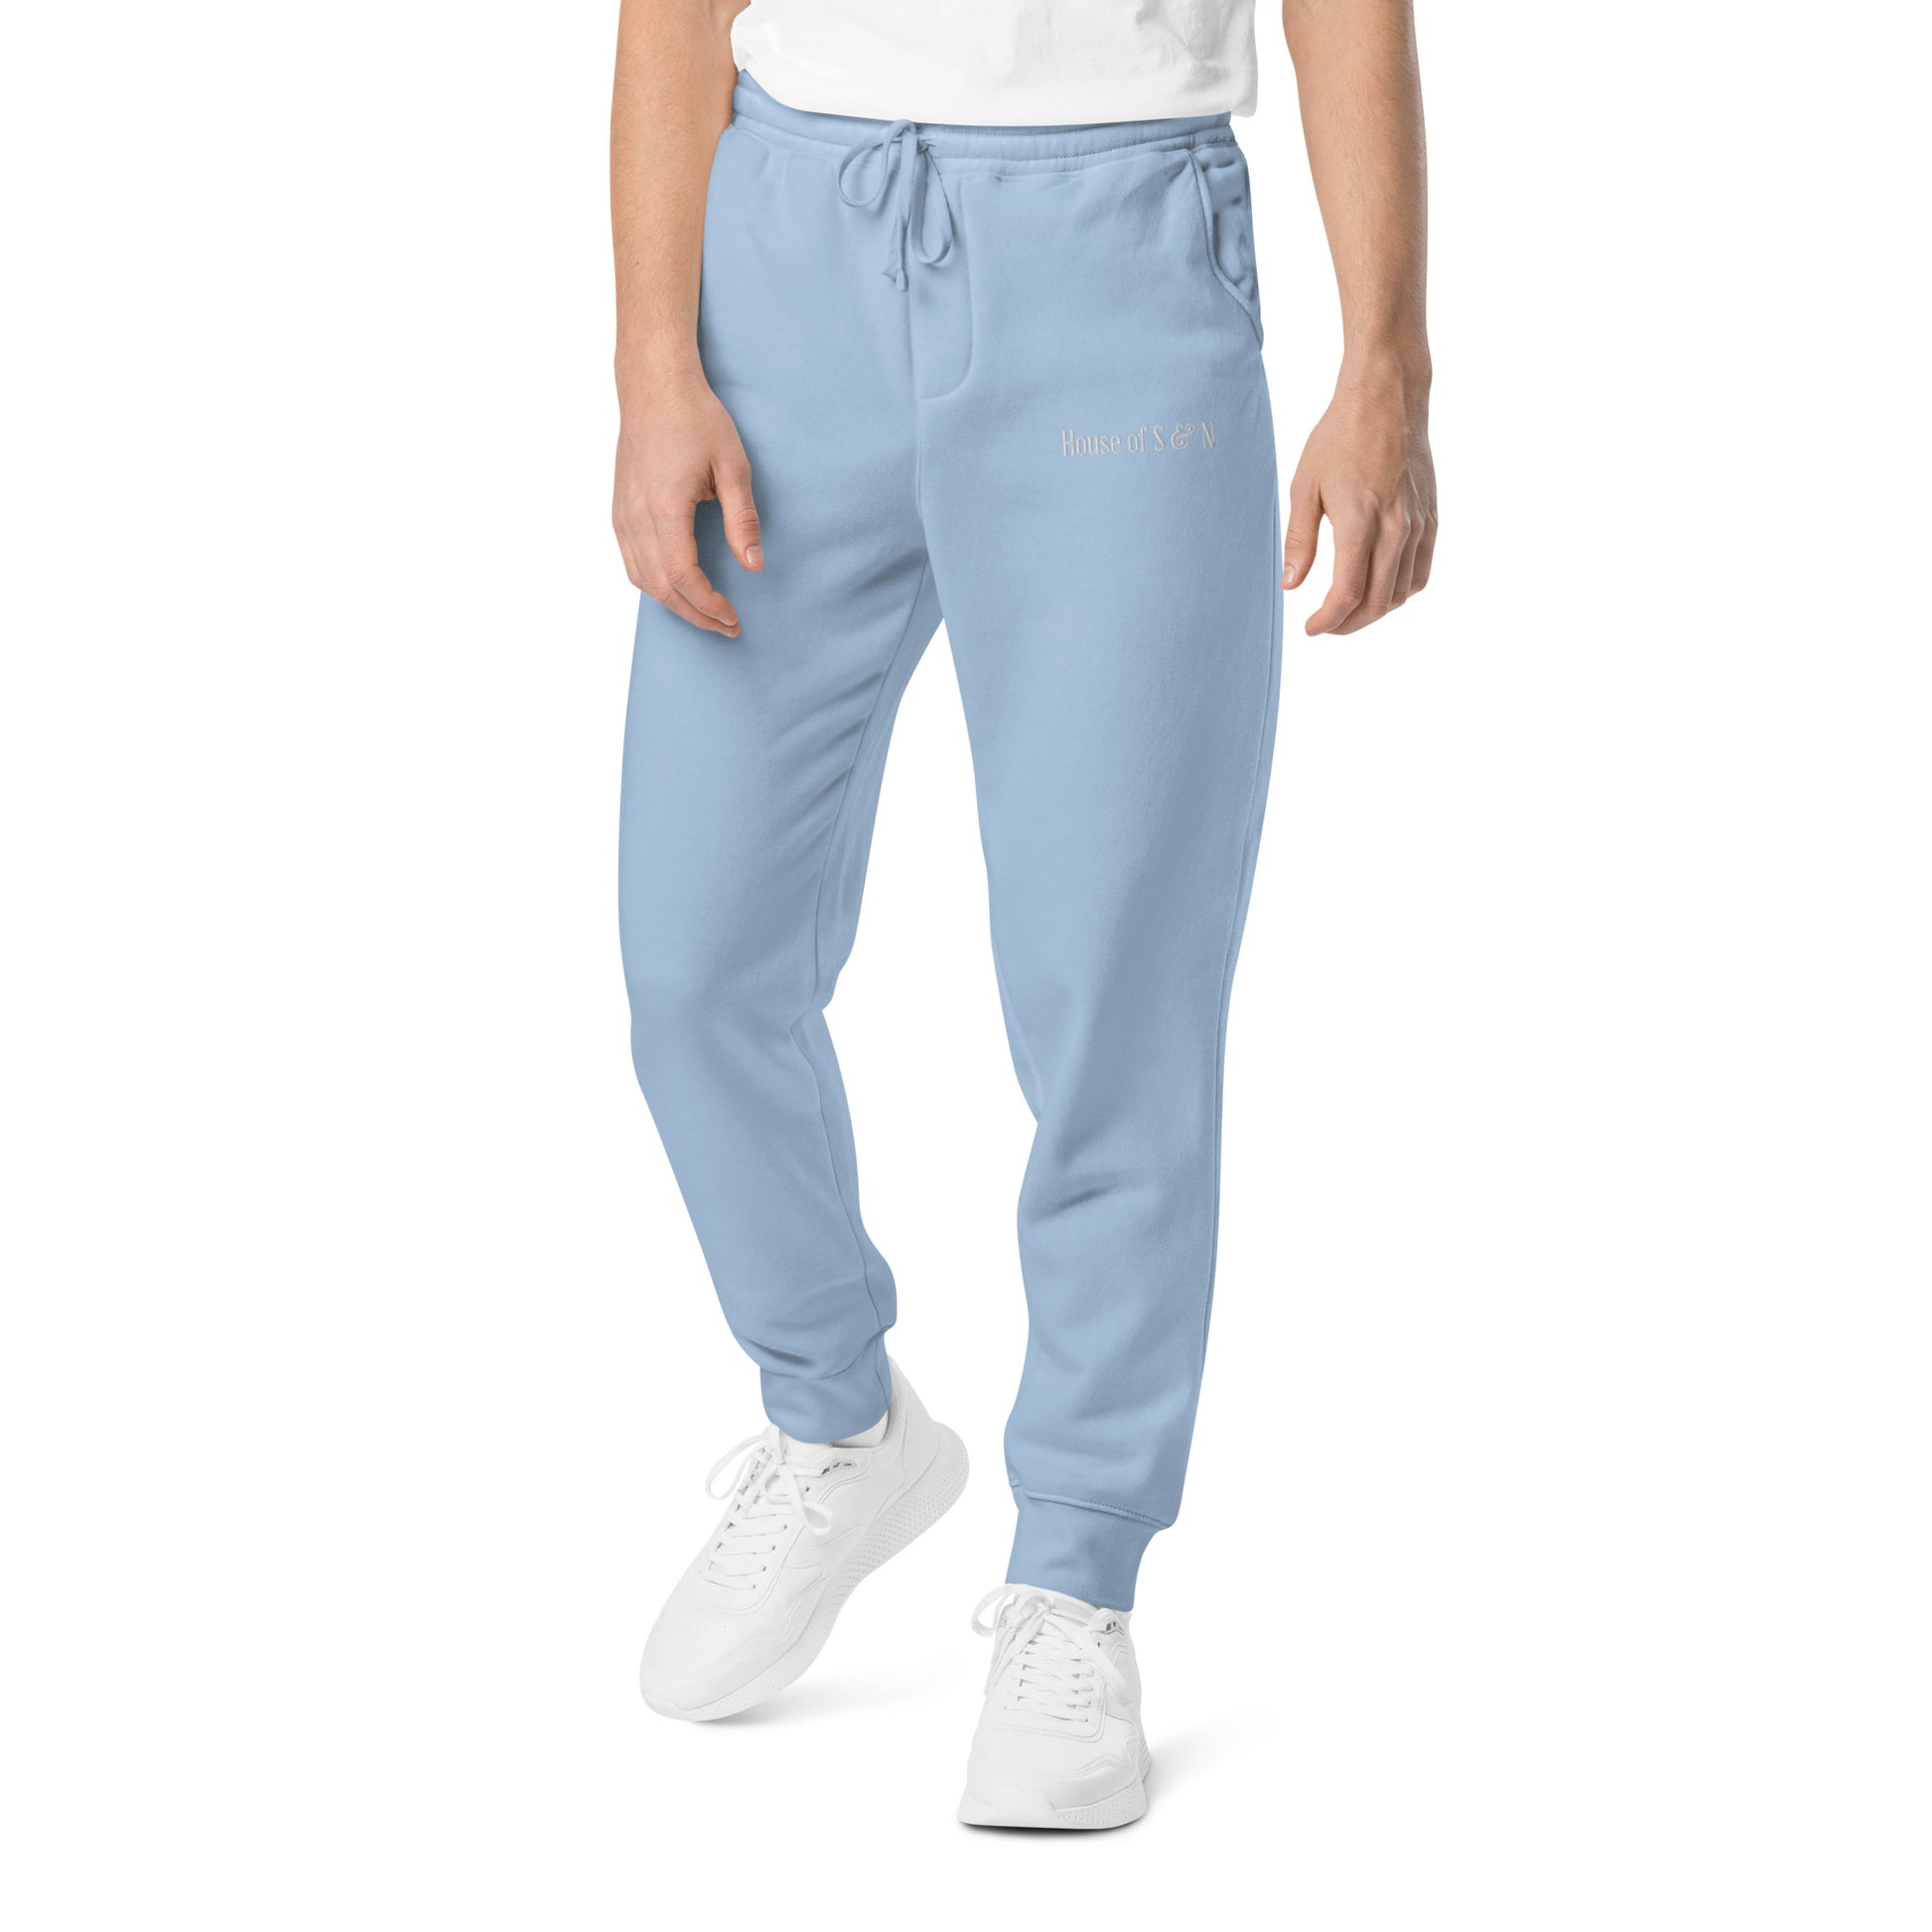 Unisex pigment-dyed sweatpants - House of S & N